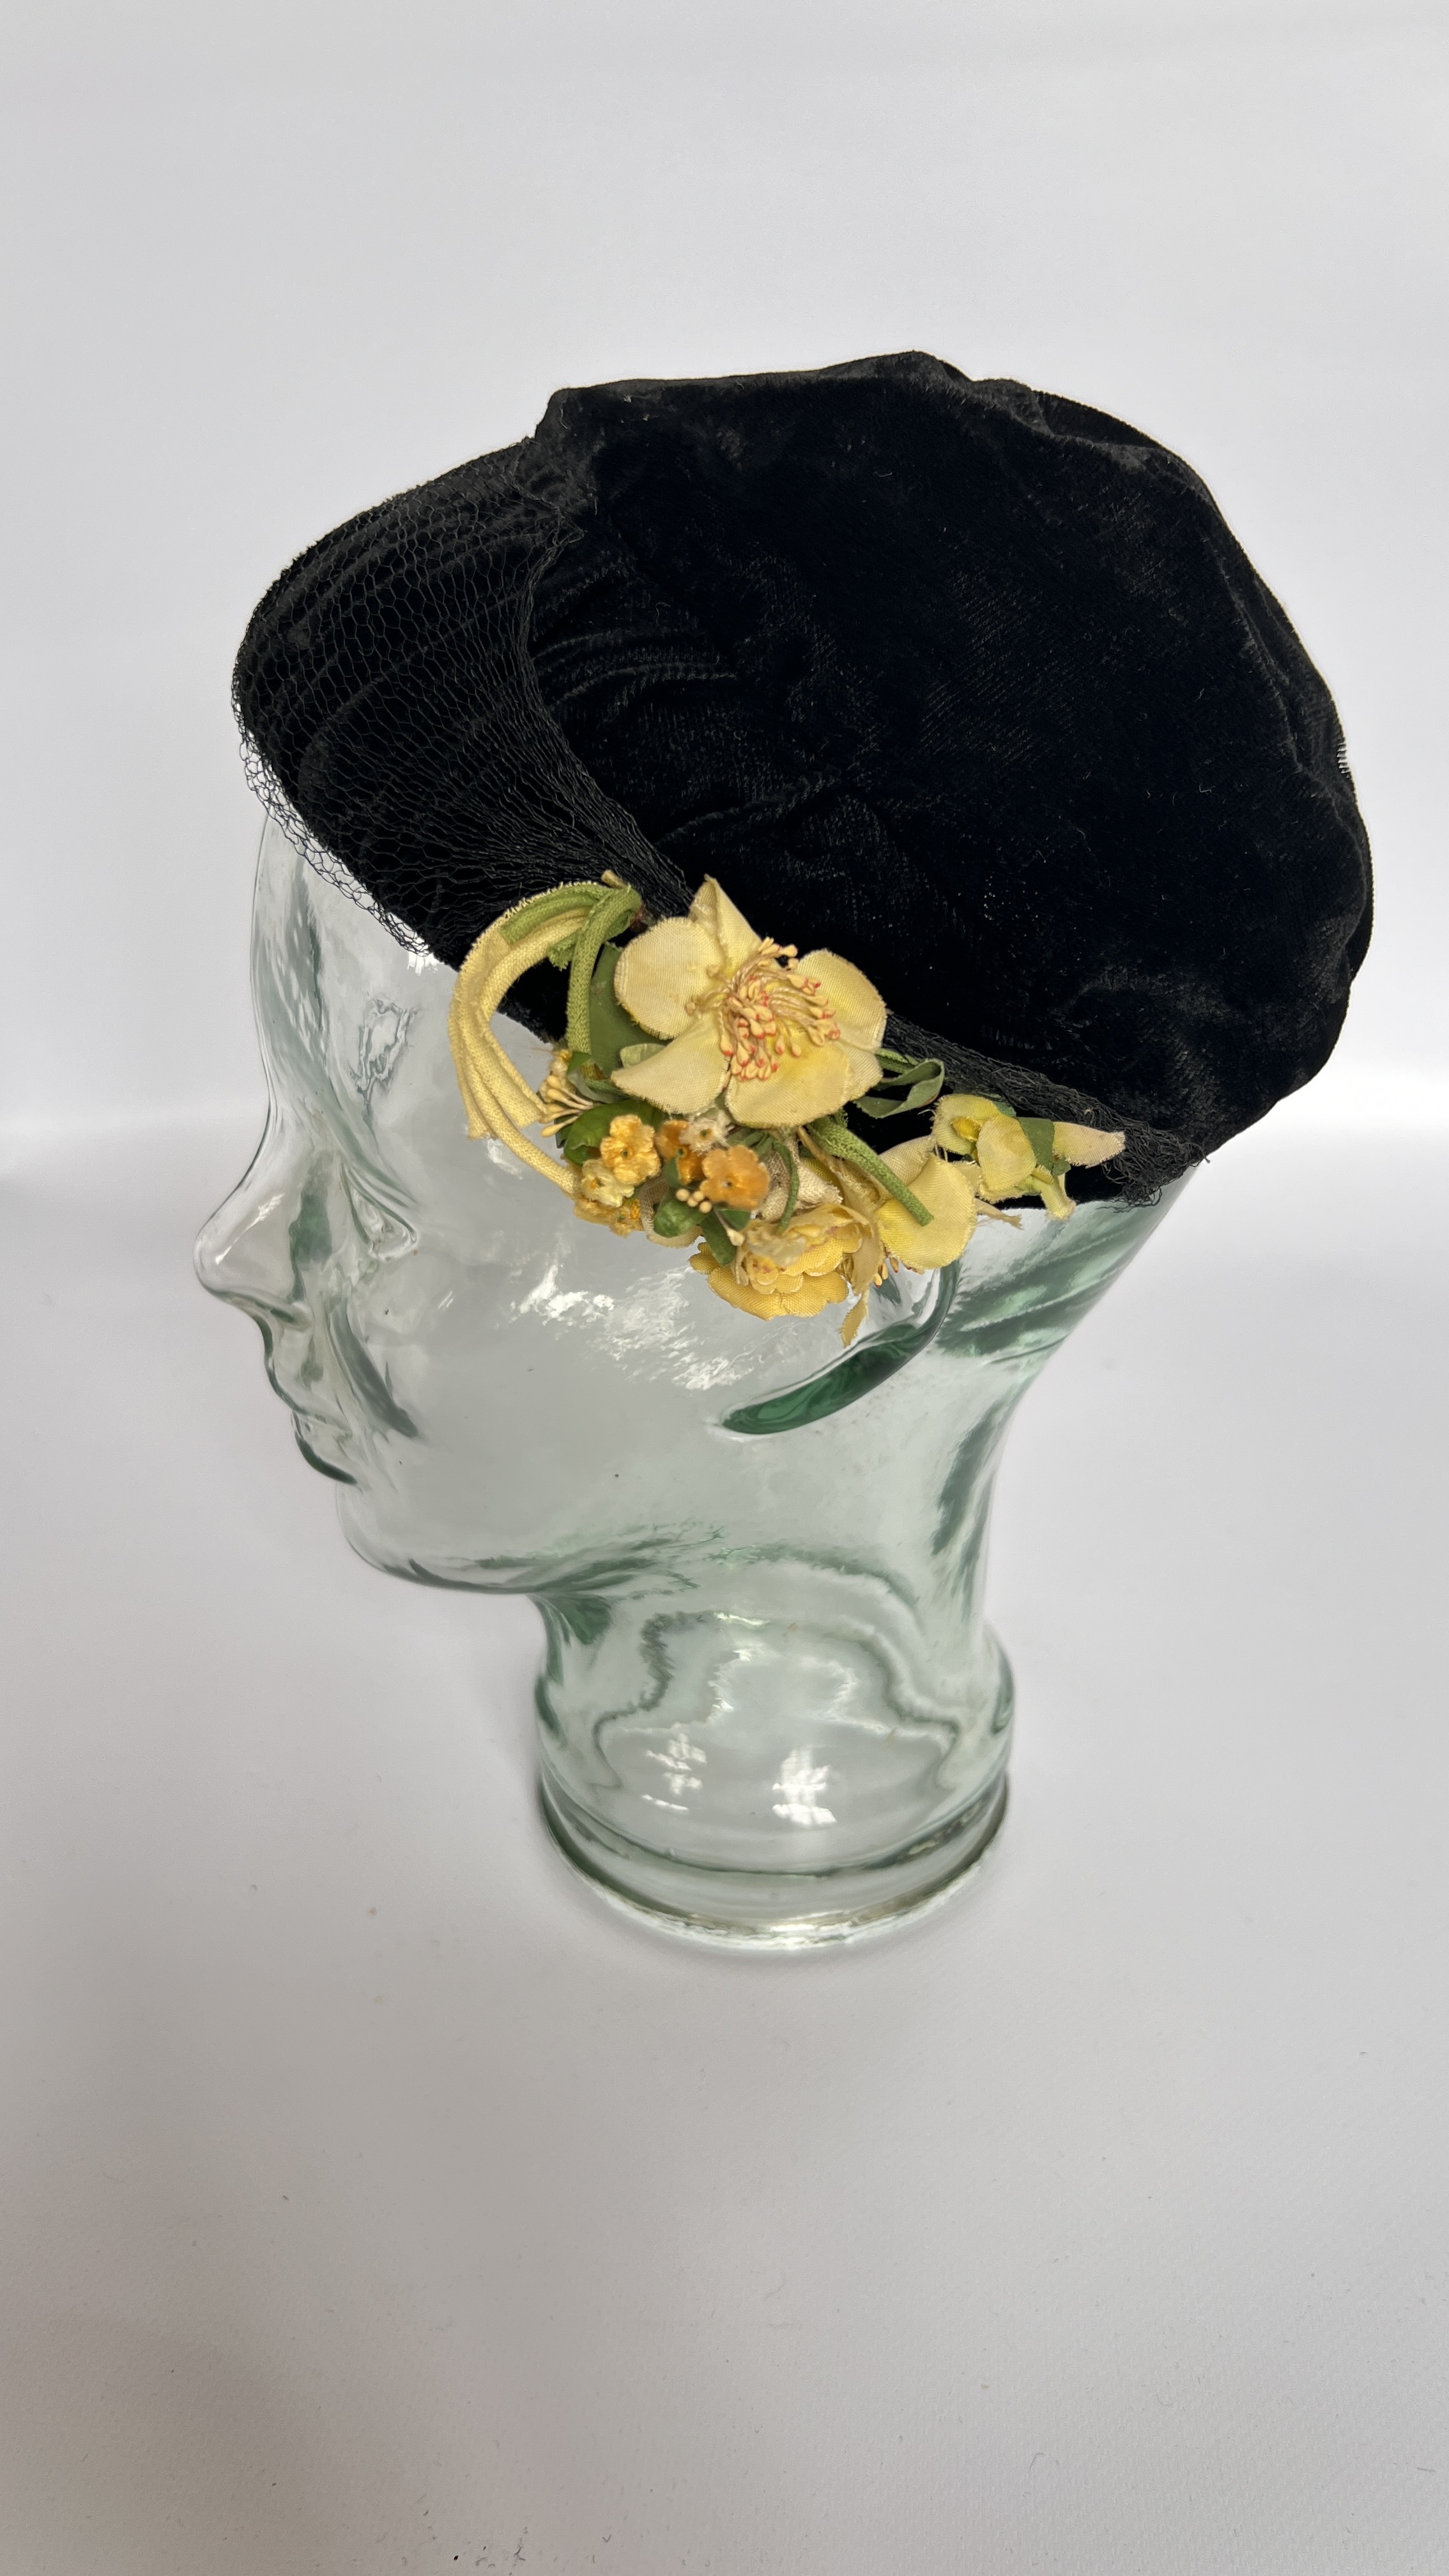 8 1950/60S HATS, 2 FLOWERED BONNETS, 1 WHITE KNITTED BONNET WITH WHITE PLASTIC DISCS, - Image 24 of 32